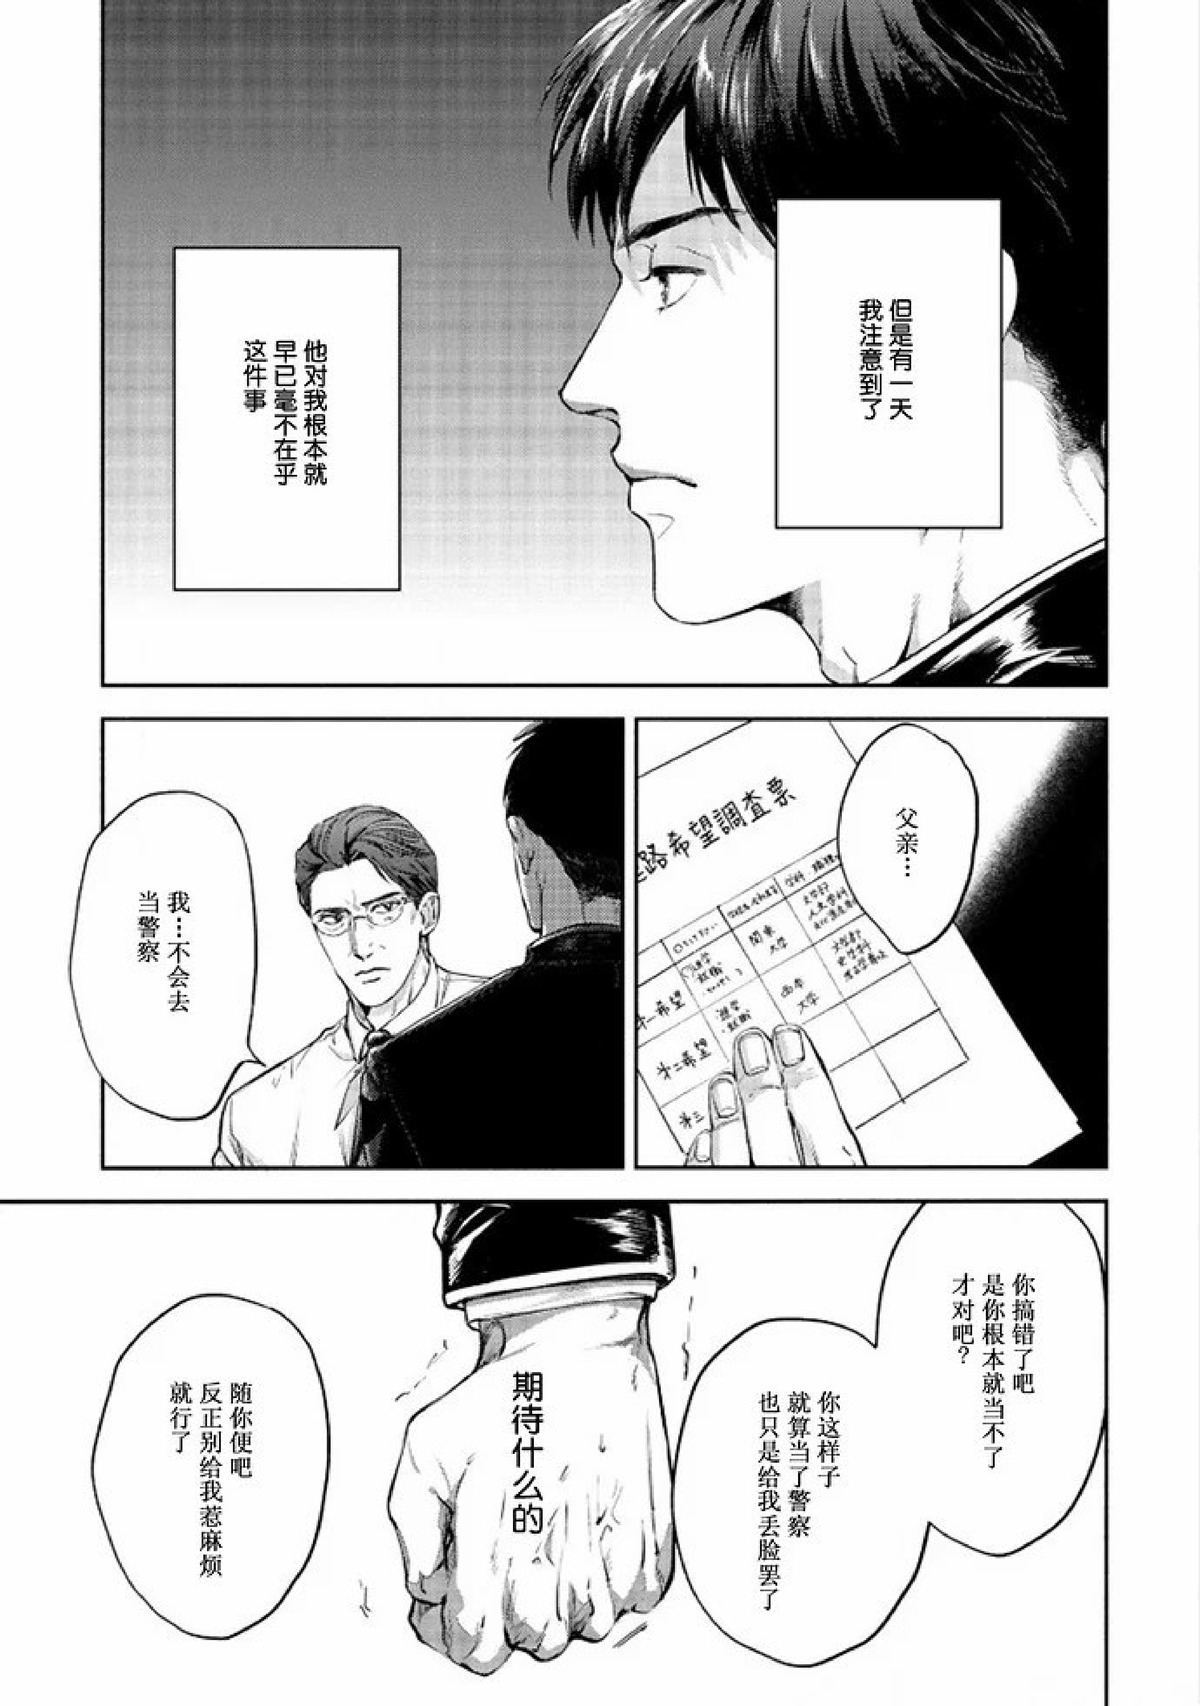 【Two sides of the same coin[耽美]】漫画-（上卷01-02）章节漫画下拉式图片-23.jpg